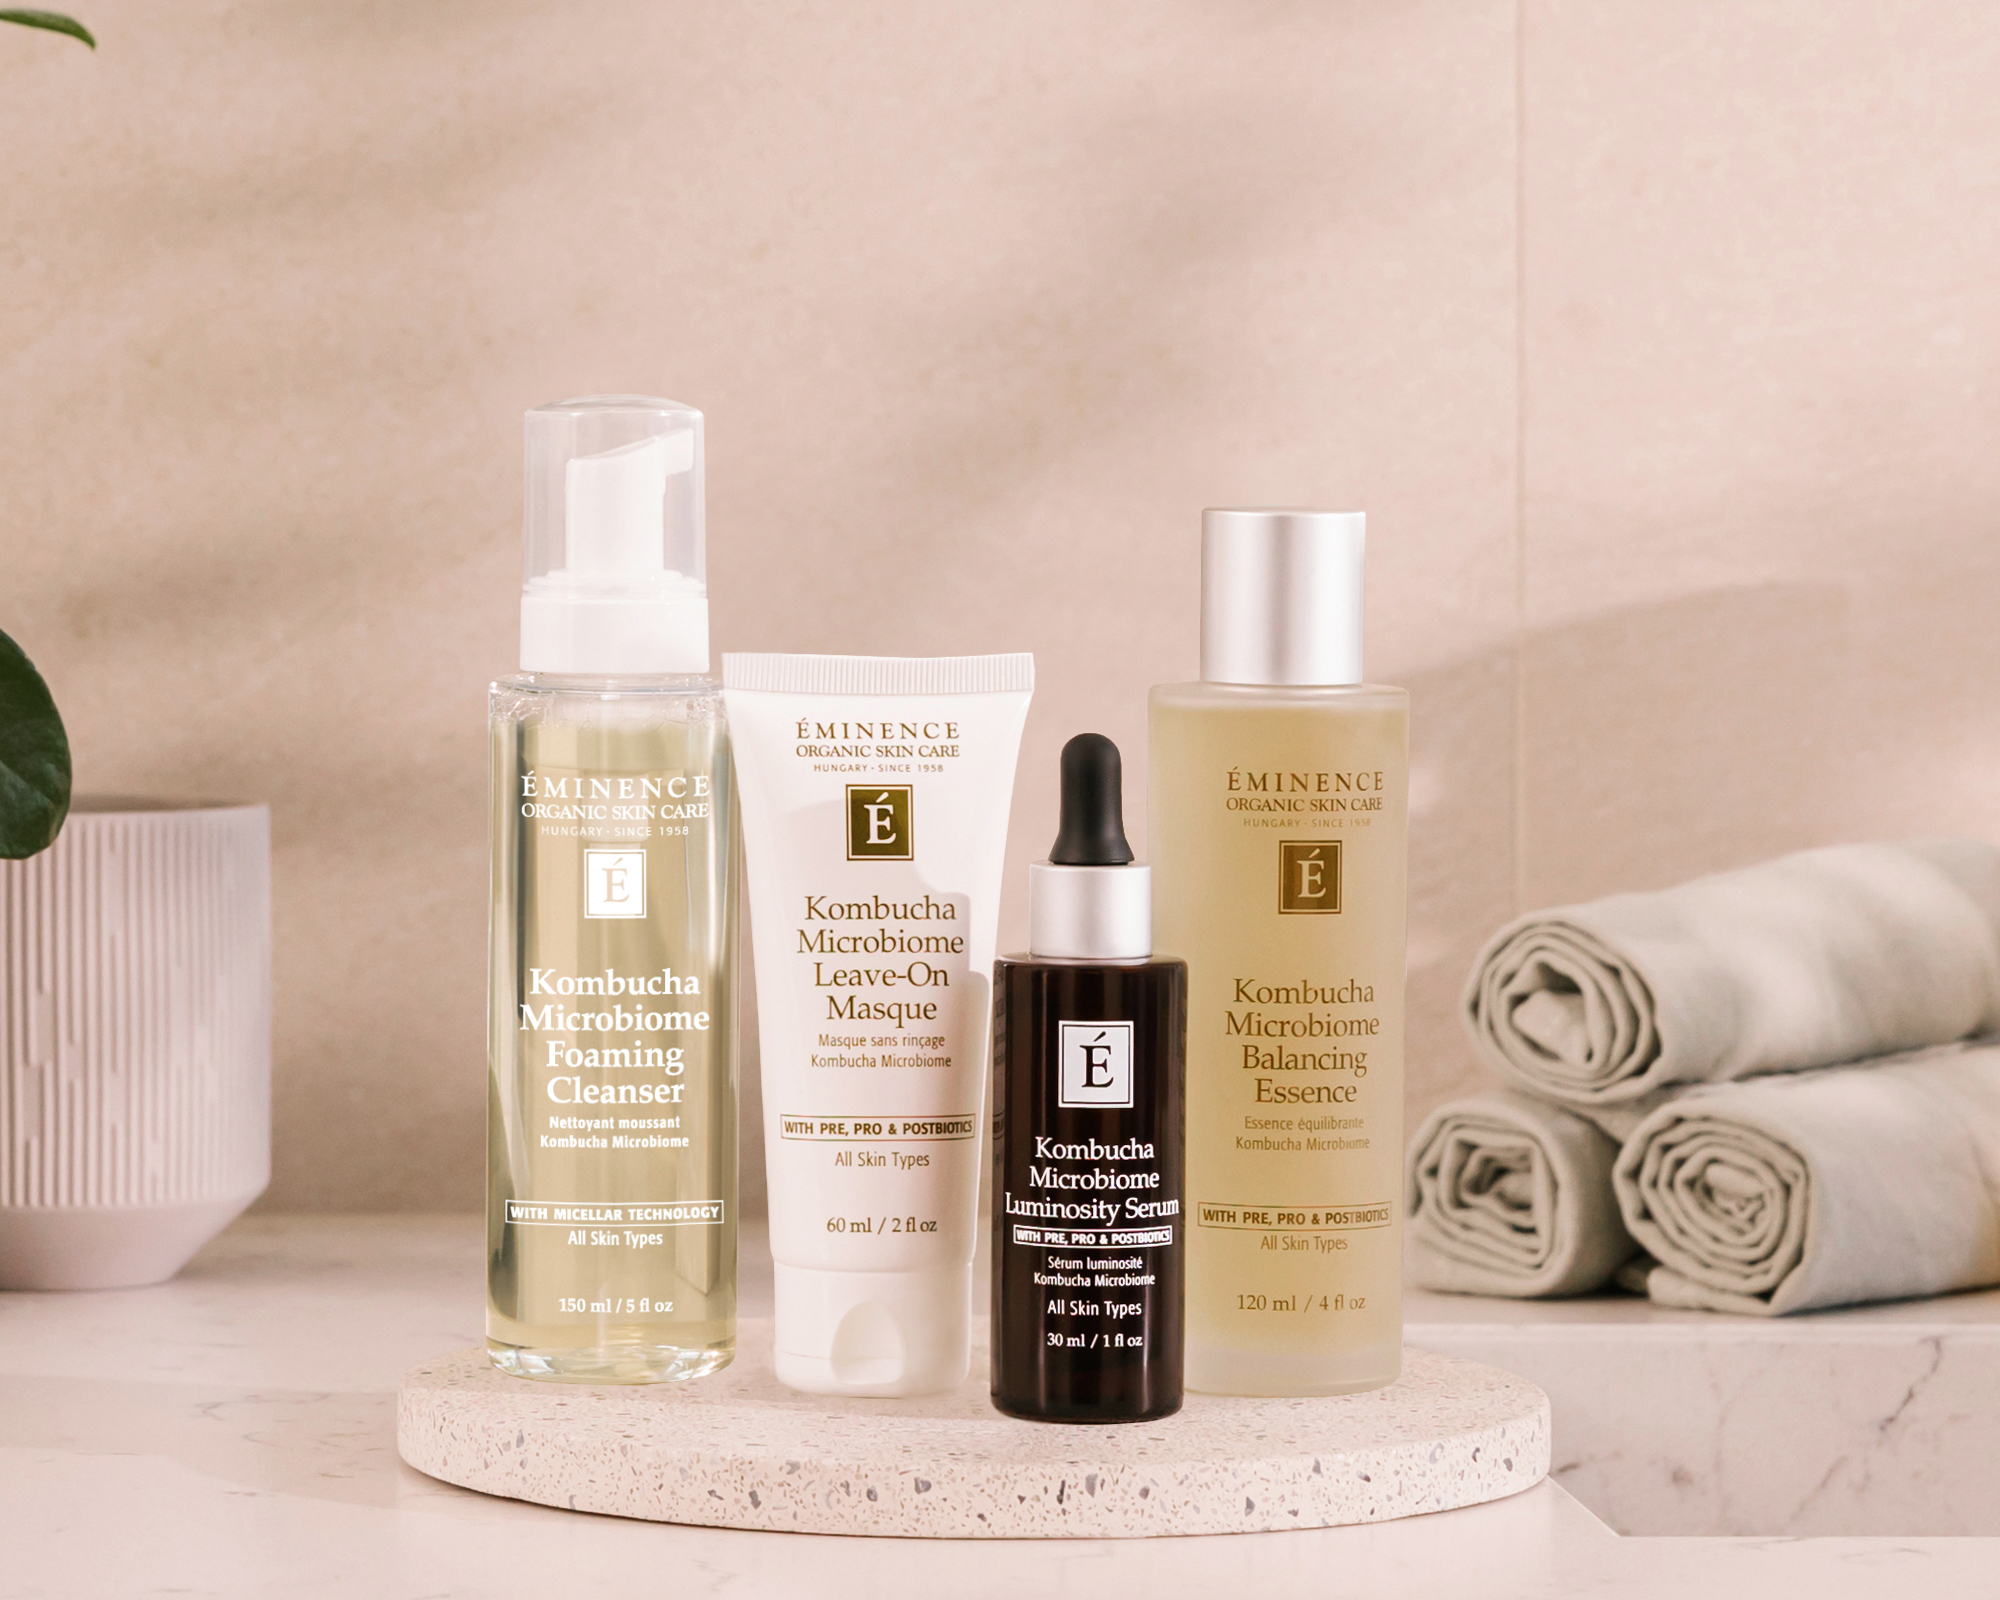 The Kombucha Microbiome Collection from Eminence Organic
Skin Care